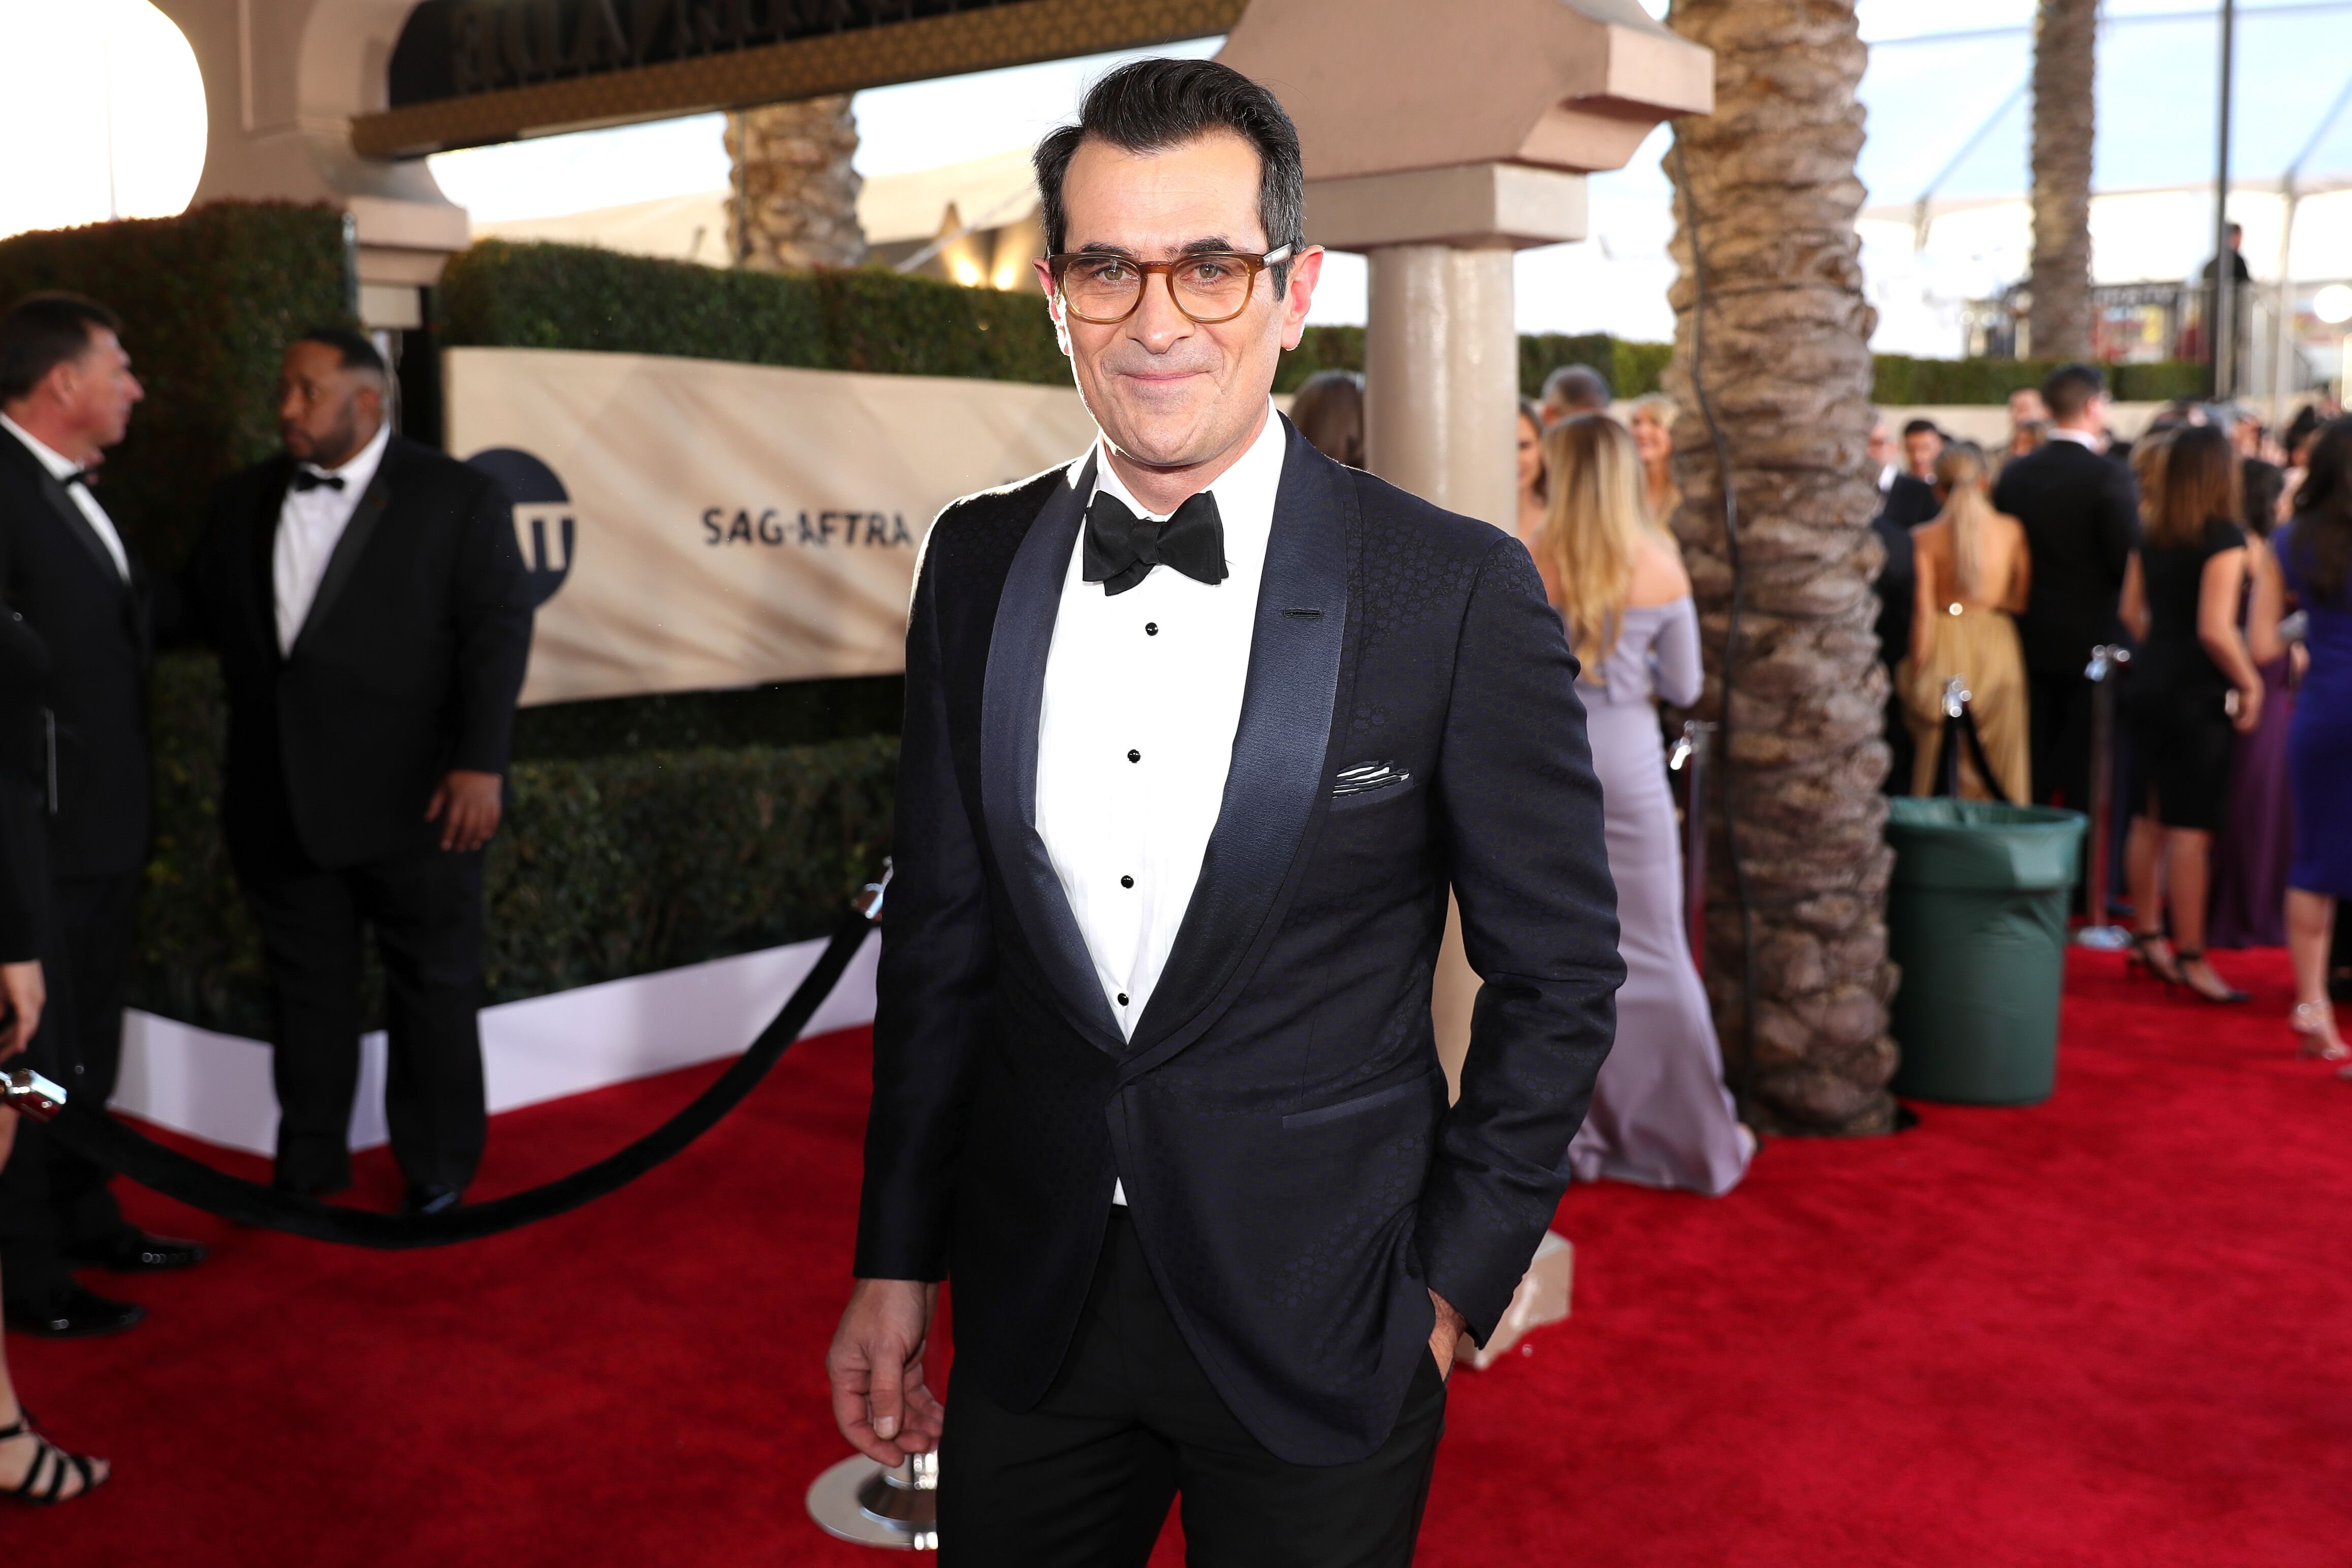 Ty Burrell at the 23rd Annual Screen Actors Guild Awards in 2017 in Los Angeles | Source: Getty Images